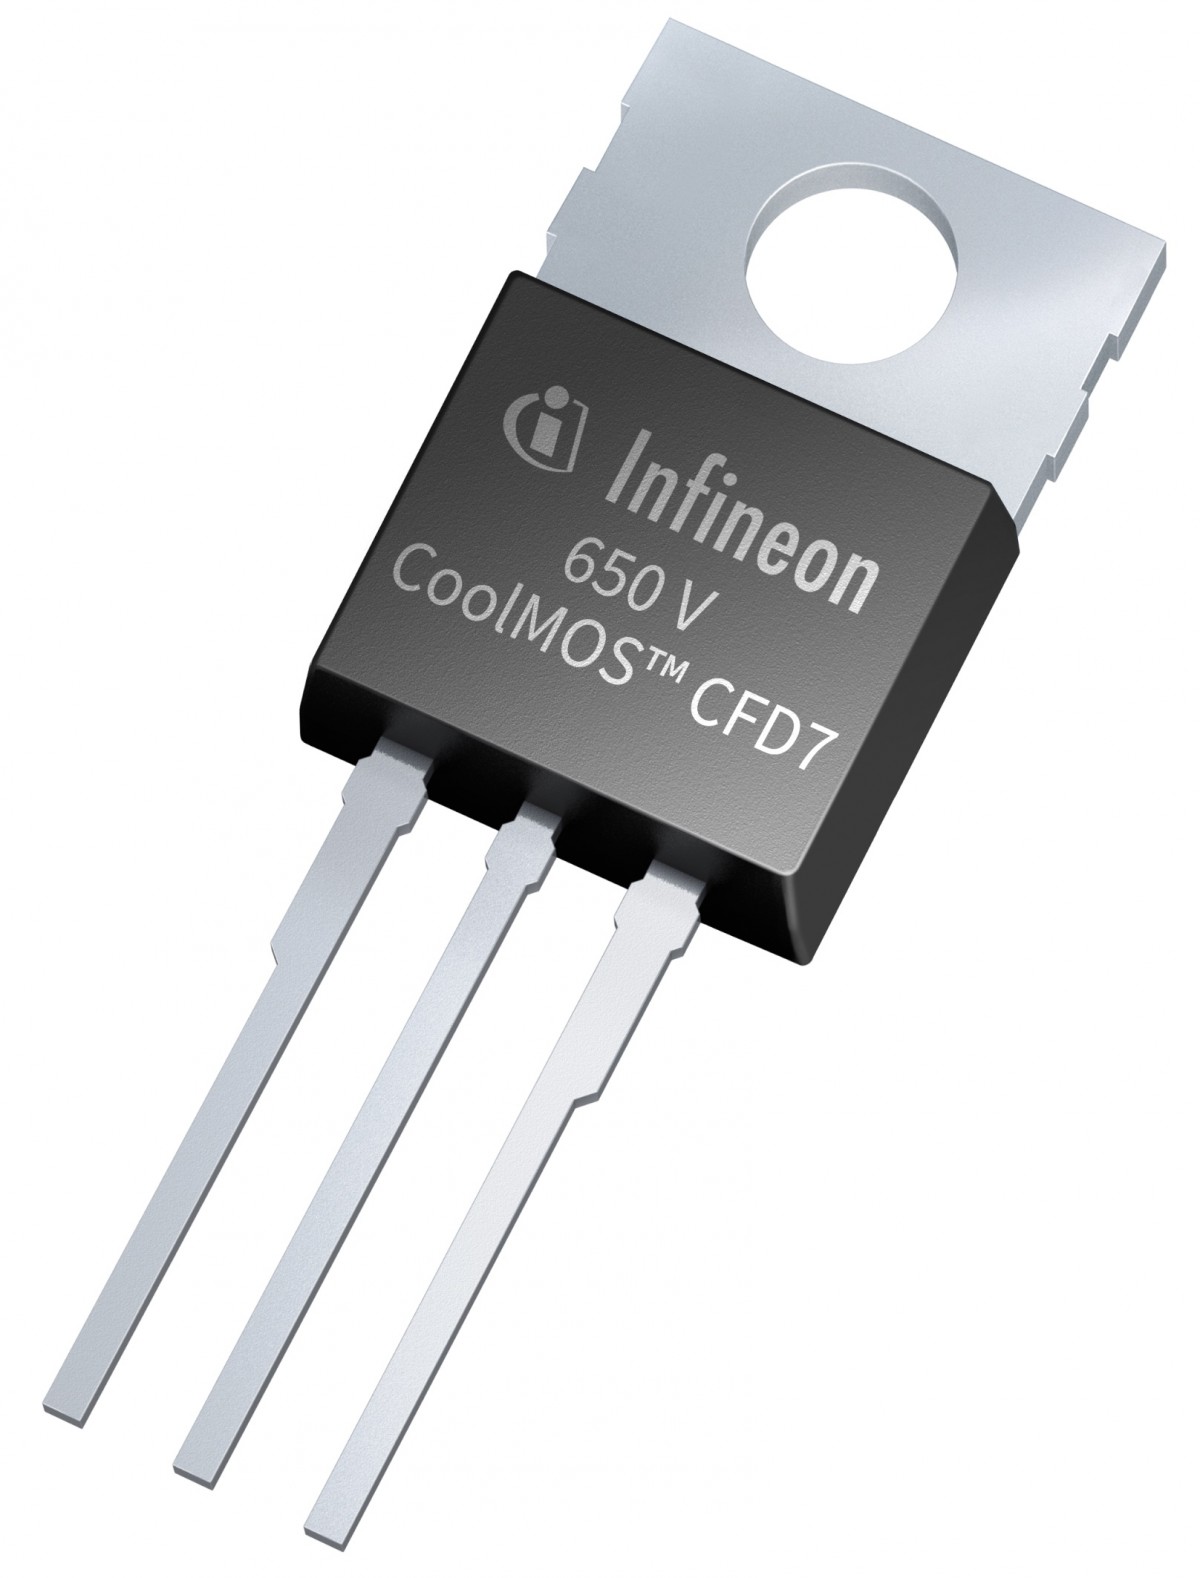 650V_CoolMOS_<a href='https://www.infineon.com/650V-CFD7' target='_blank'>CFD7</a>_TO220-3-1.jpg